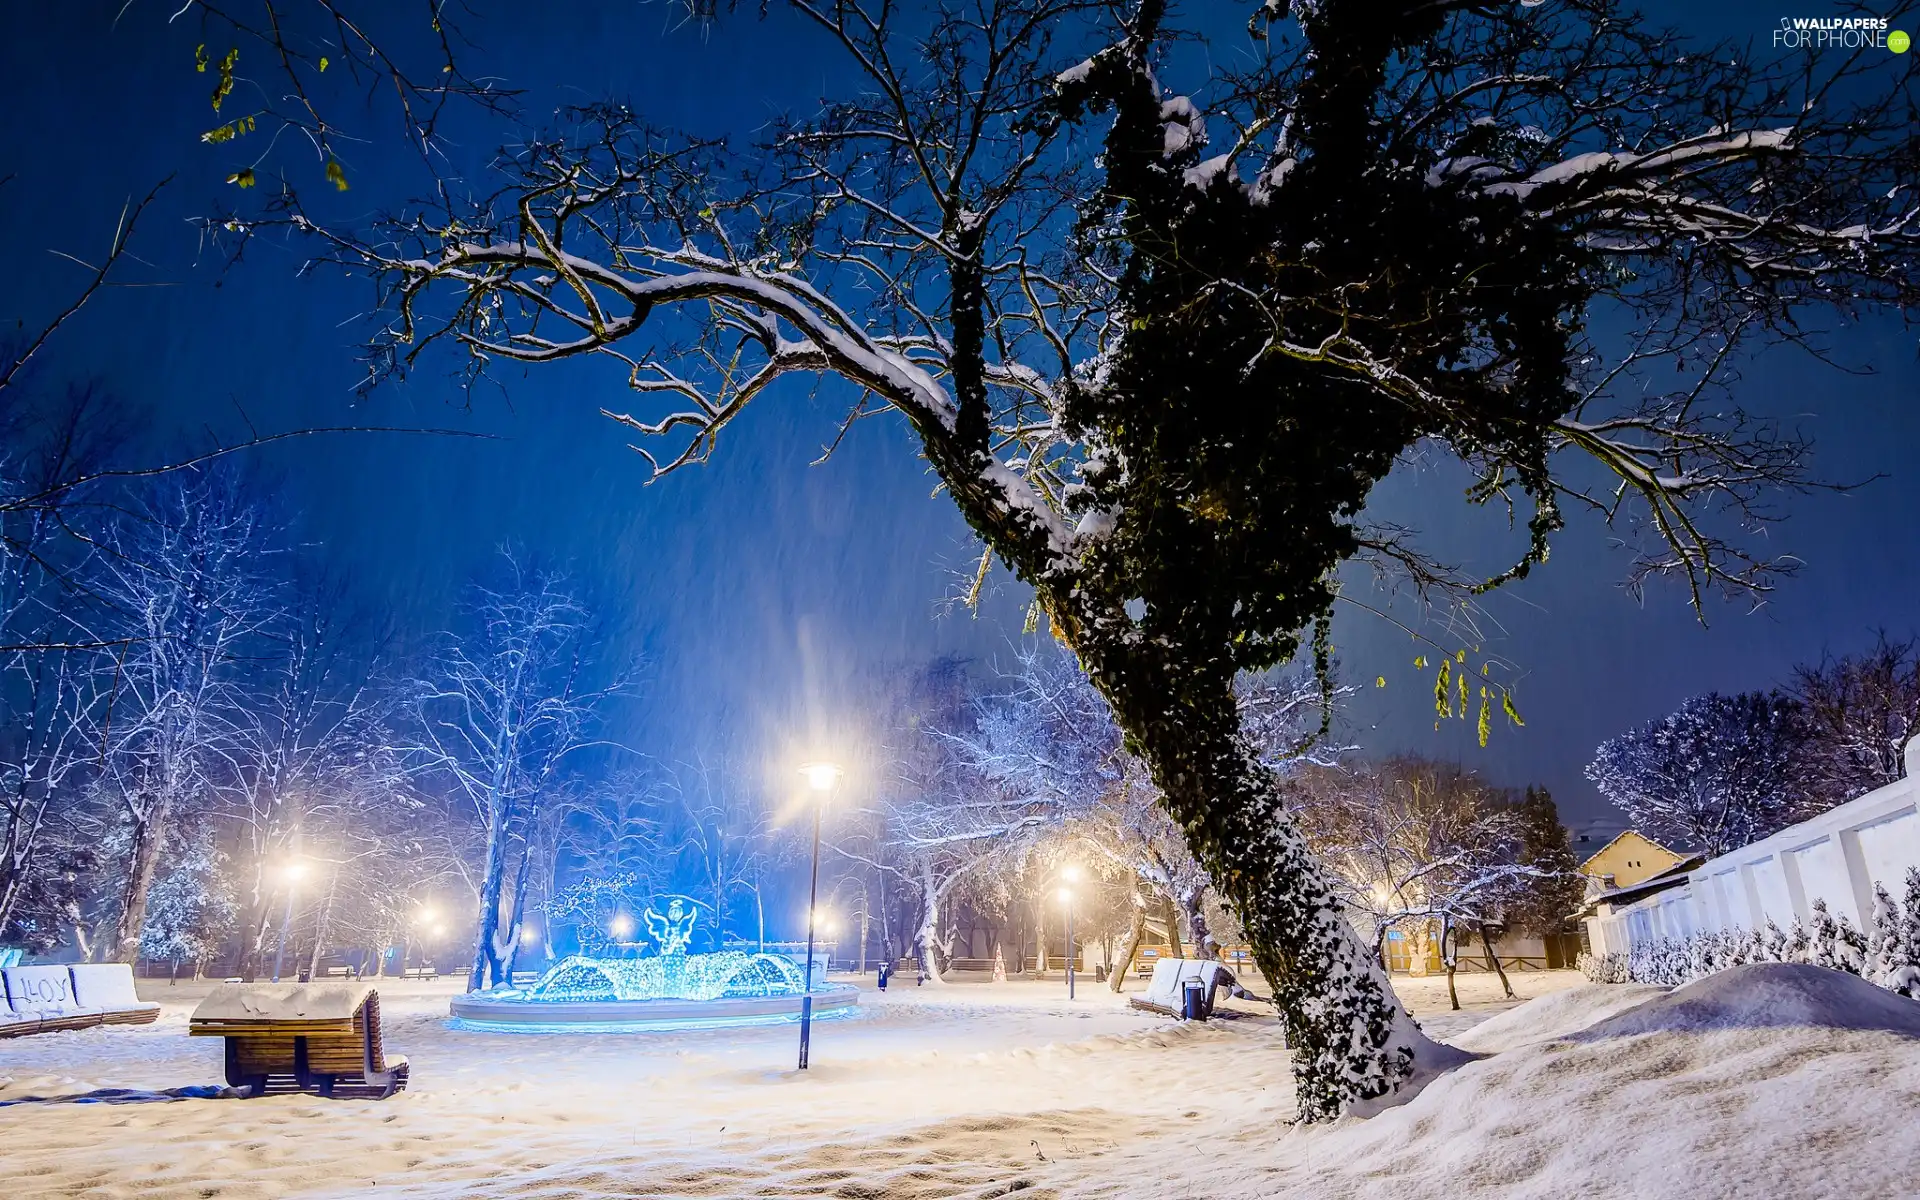 fountain, Park, viewes, lanterns, trees, winter